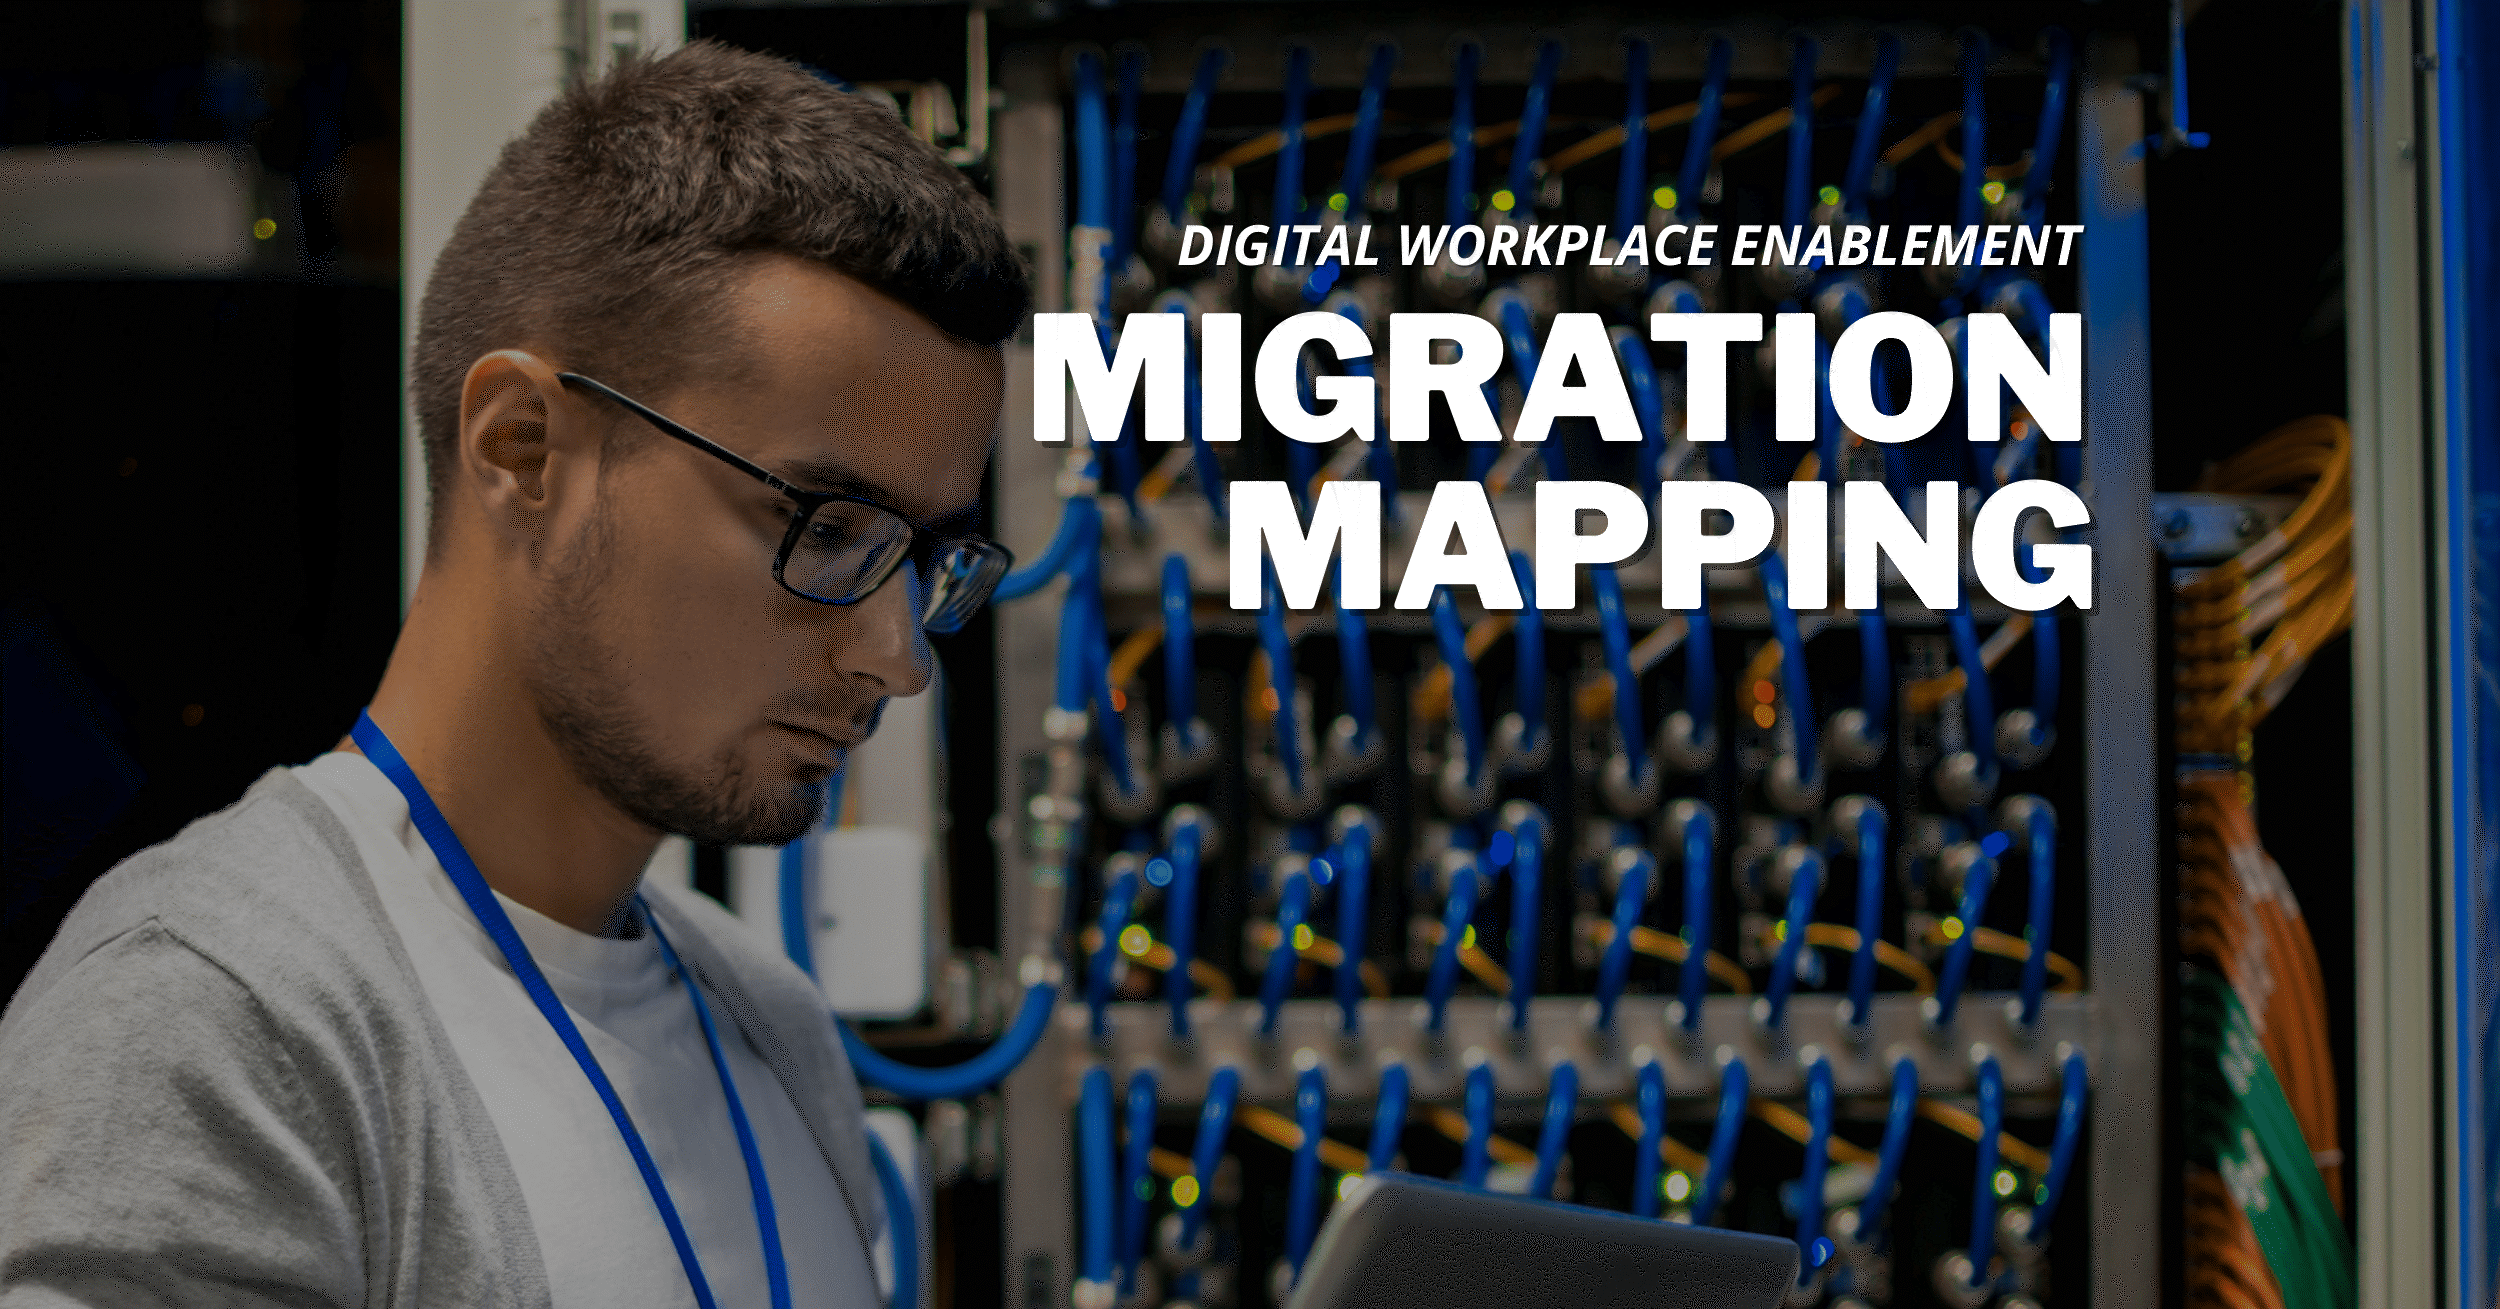 Digital Workplace Enablement: Ensuring Data Lands in the Right Place During Cloud Migration